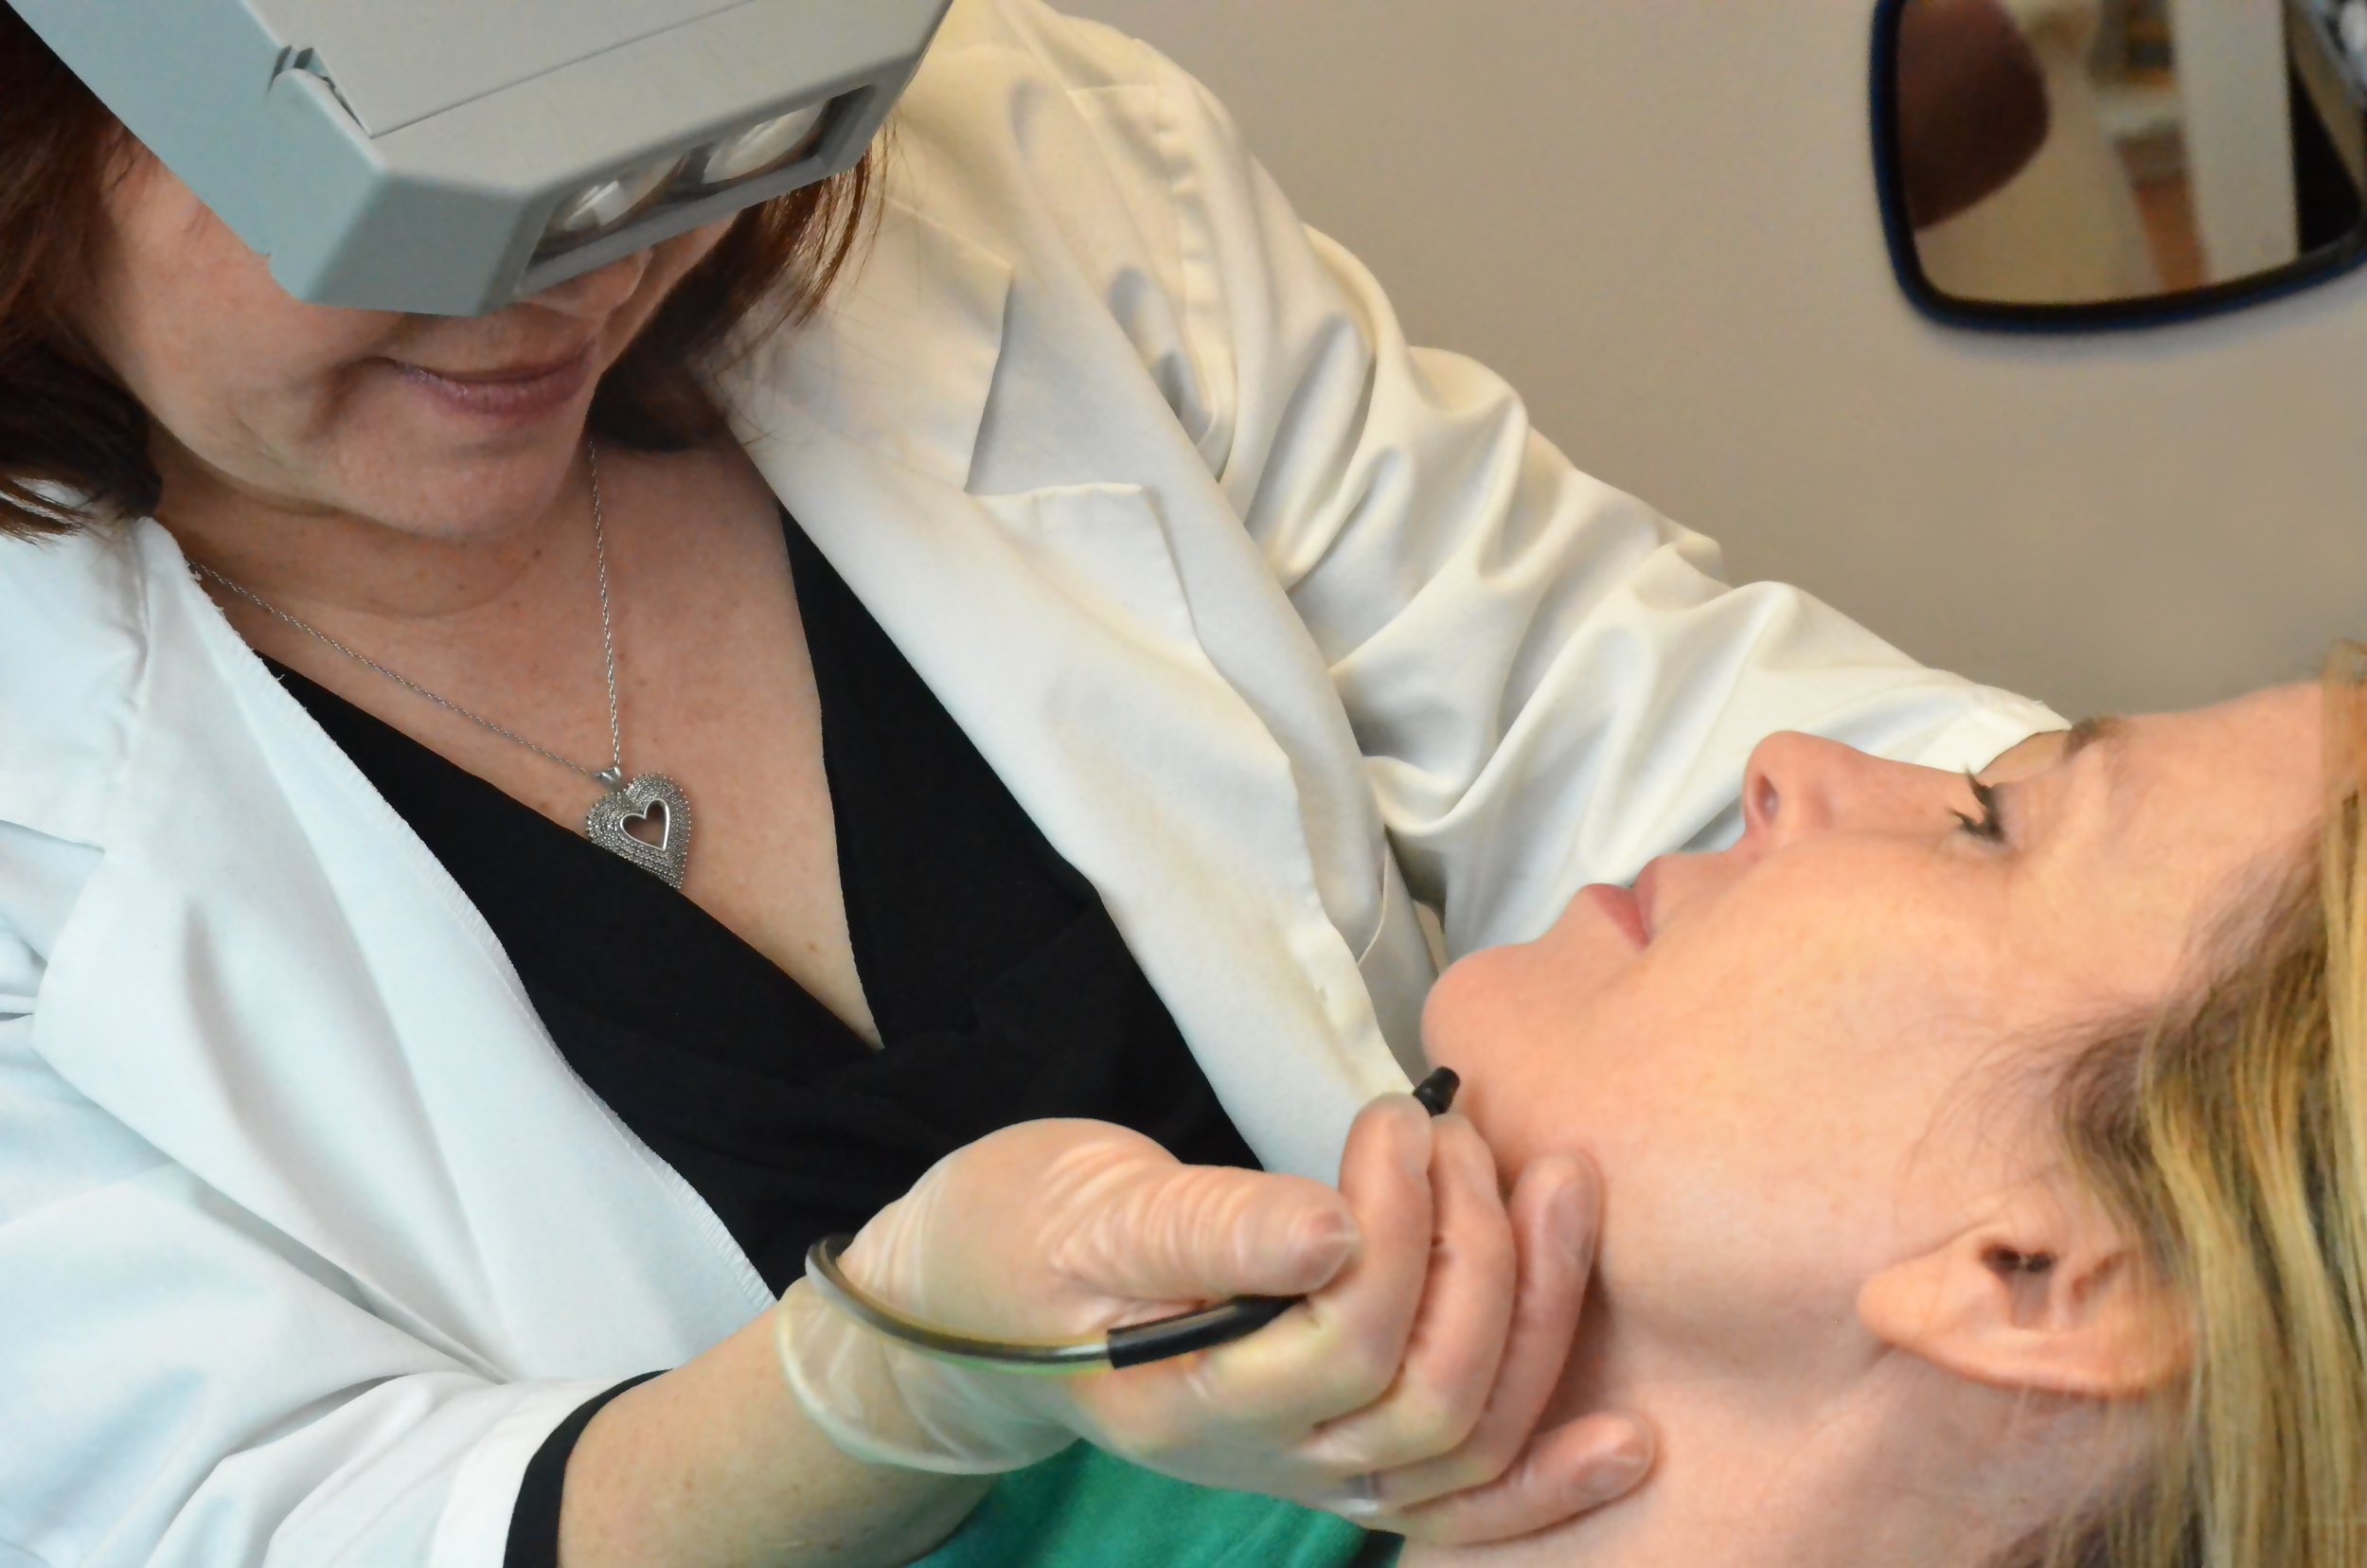 Teresa performs electrolysis on a client